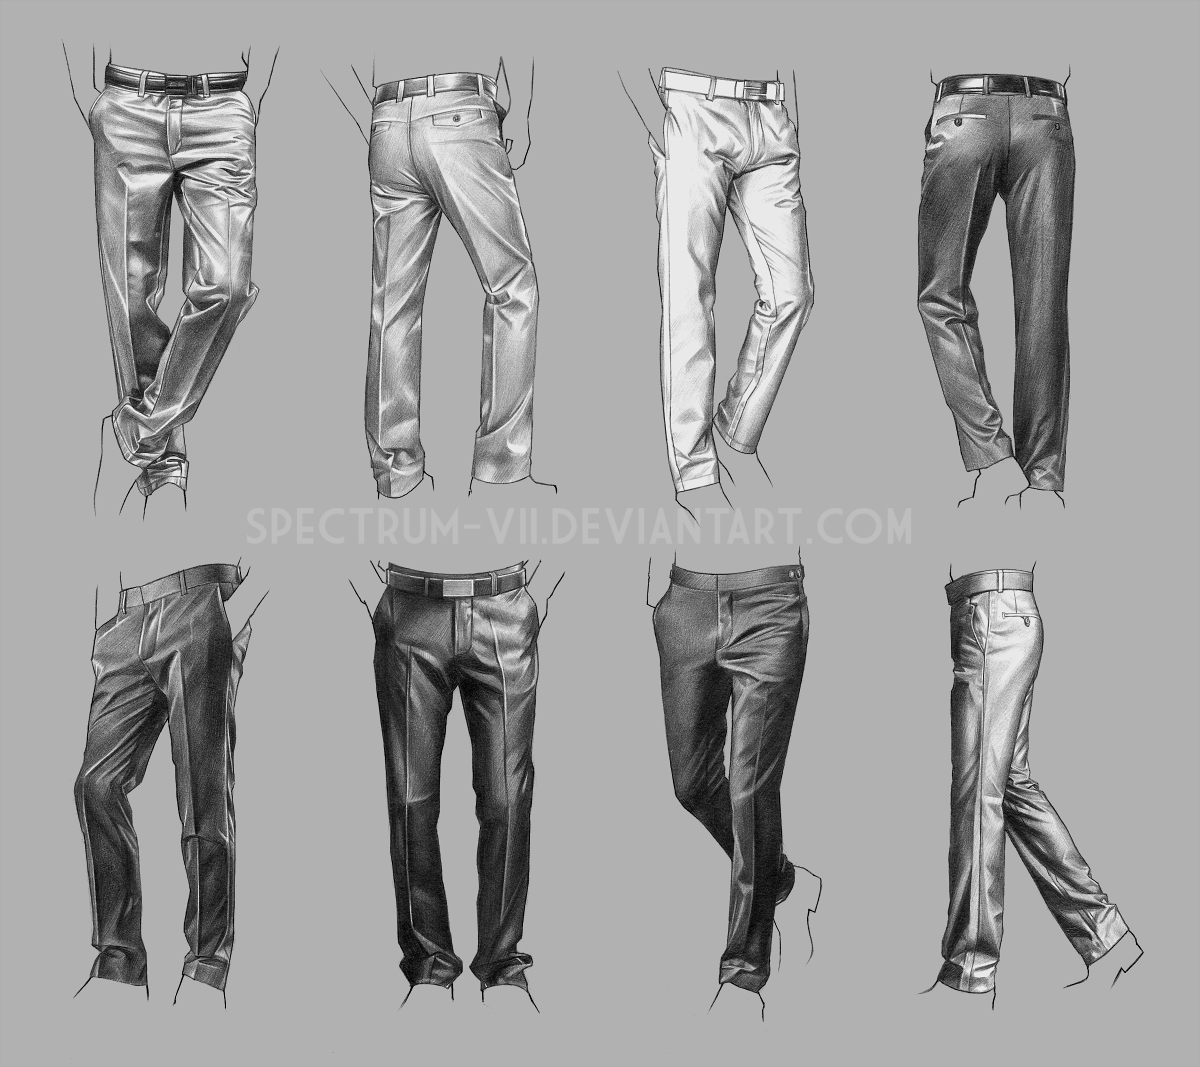 A study in suit pants by Spectrum-VII on DeviantArt